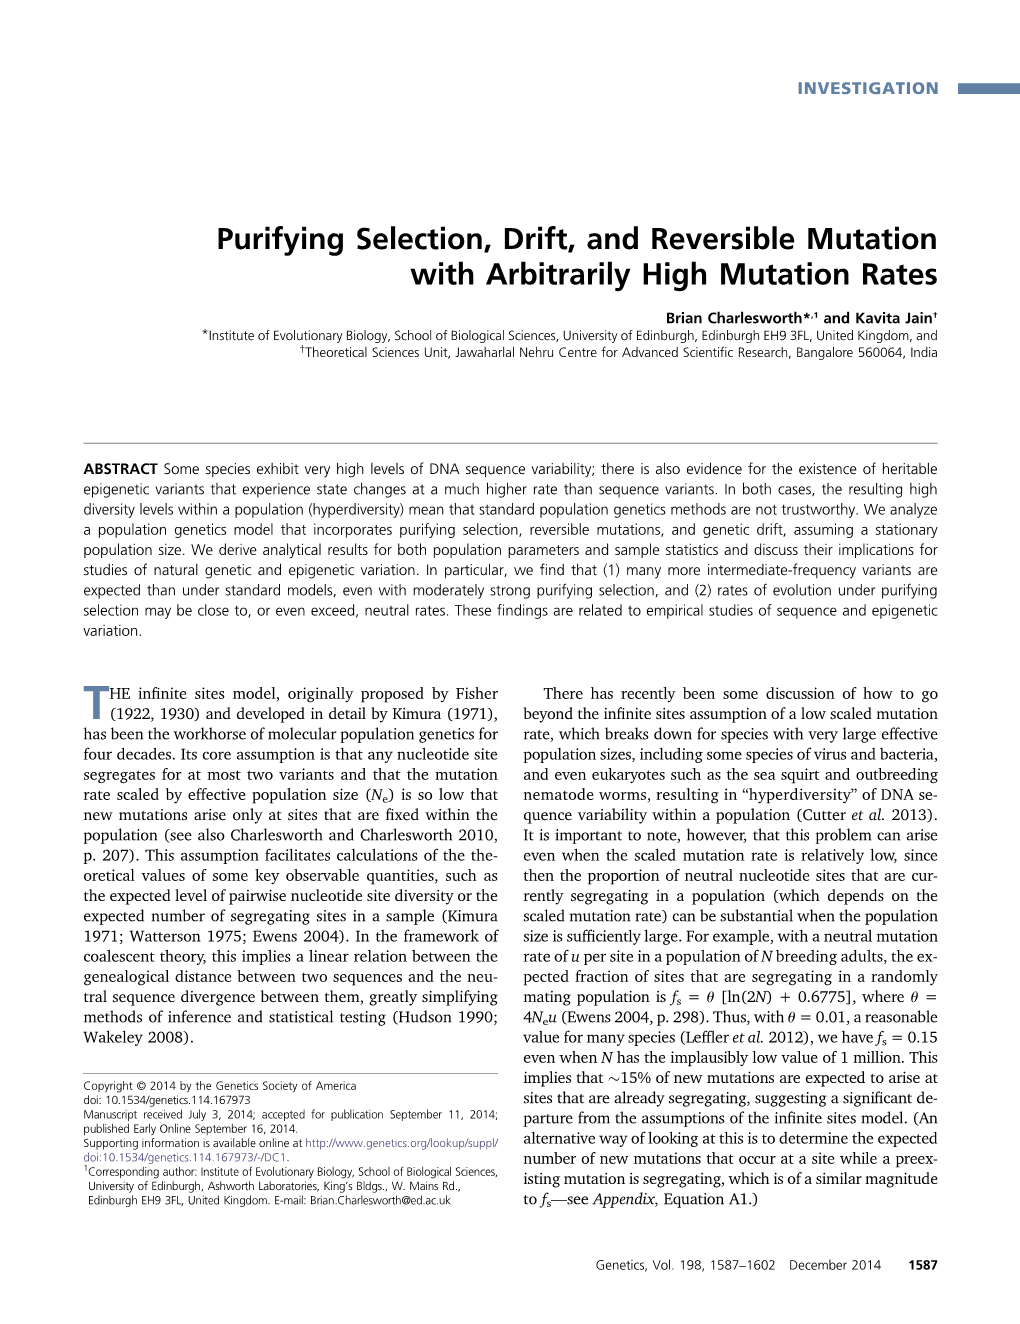 Purifying Selection, Drift, and Reversible Mutation with Arbitrarily High Mutation Rates